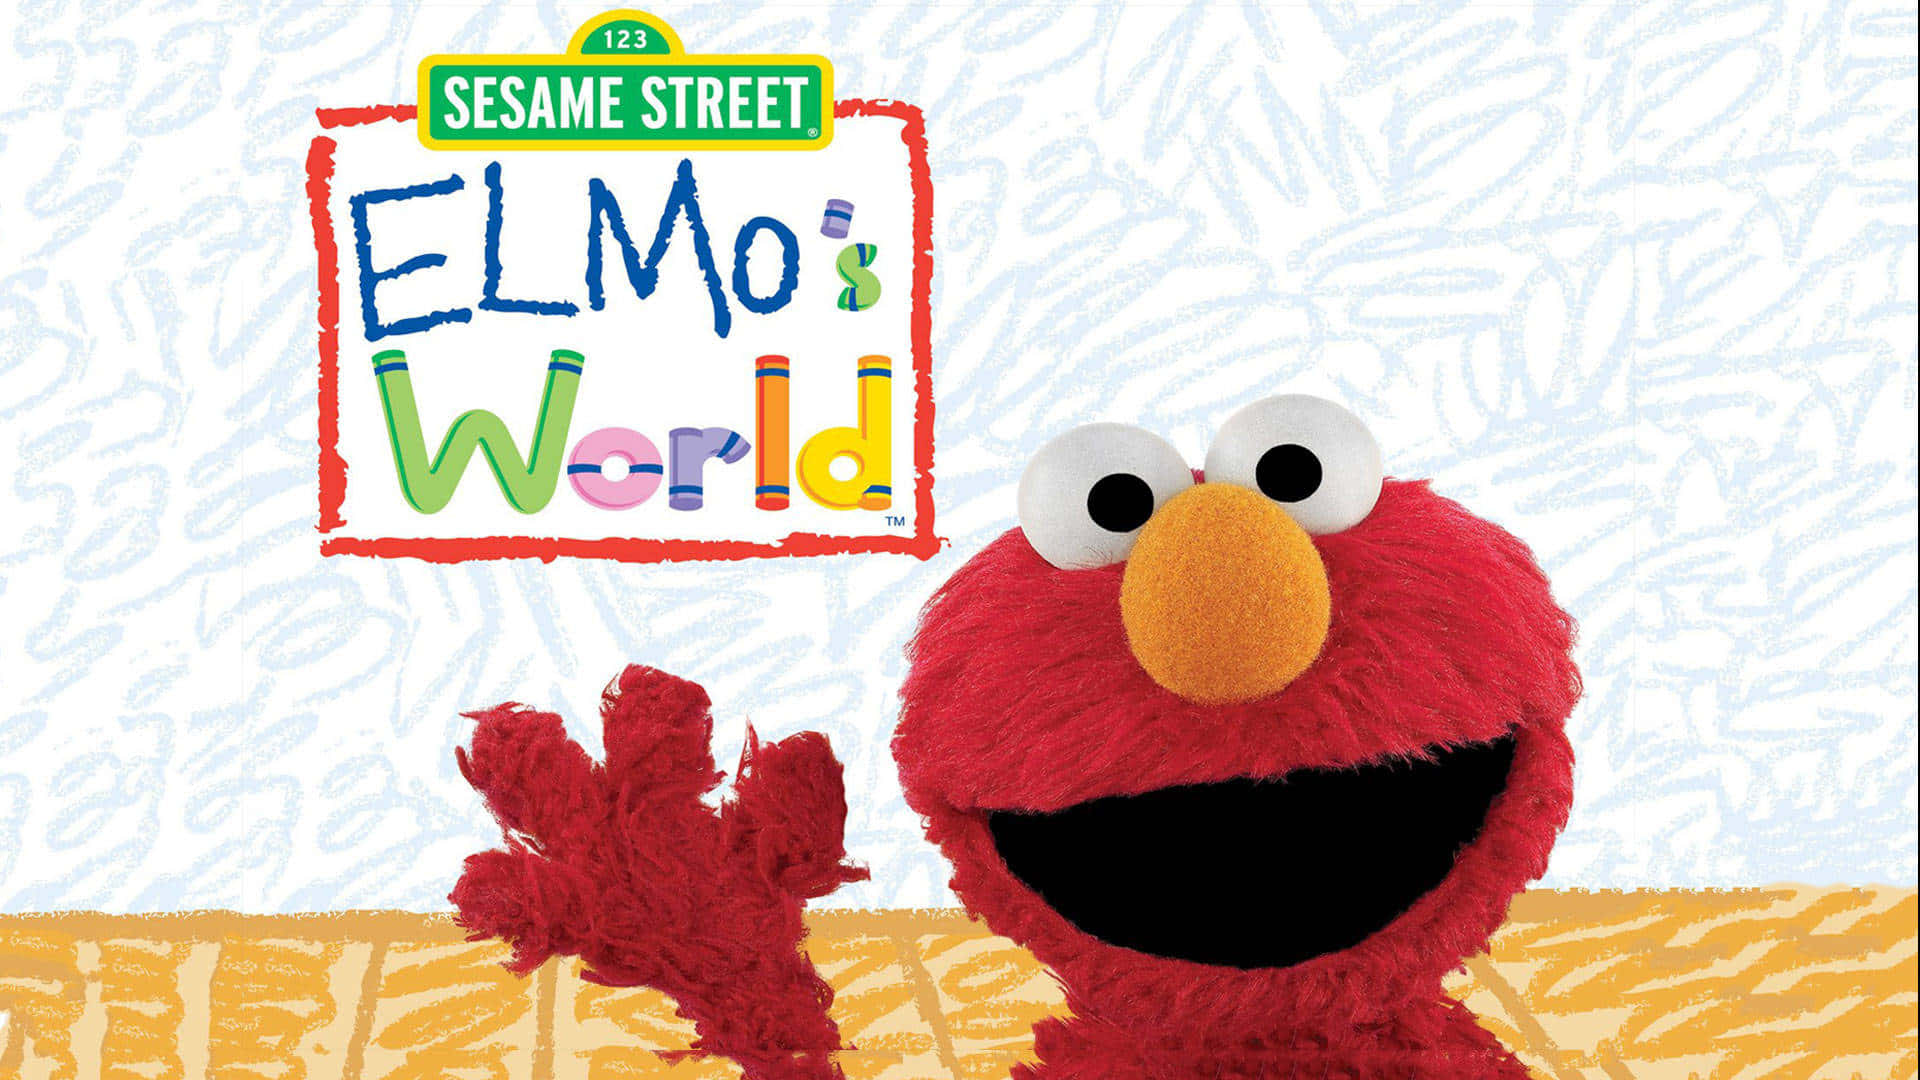 Elmo showing children the power of being friendly